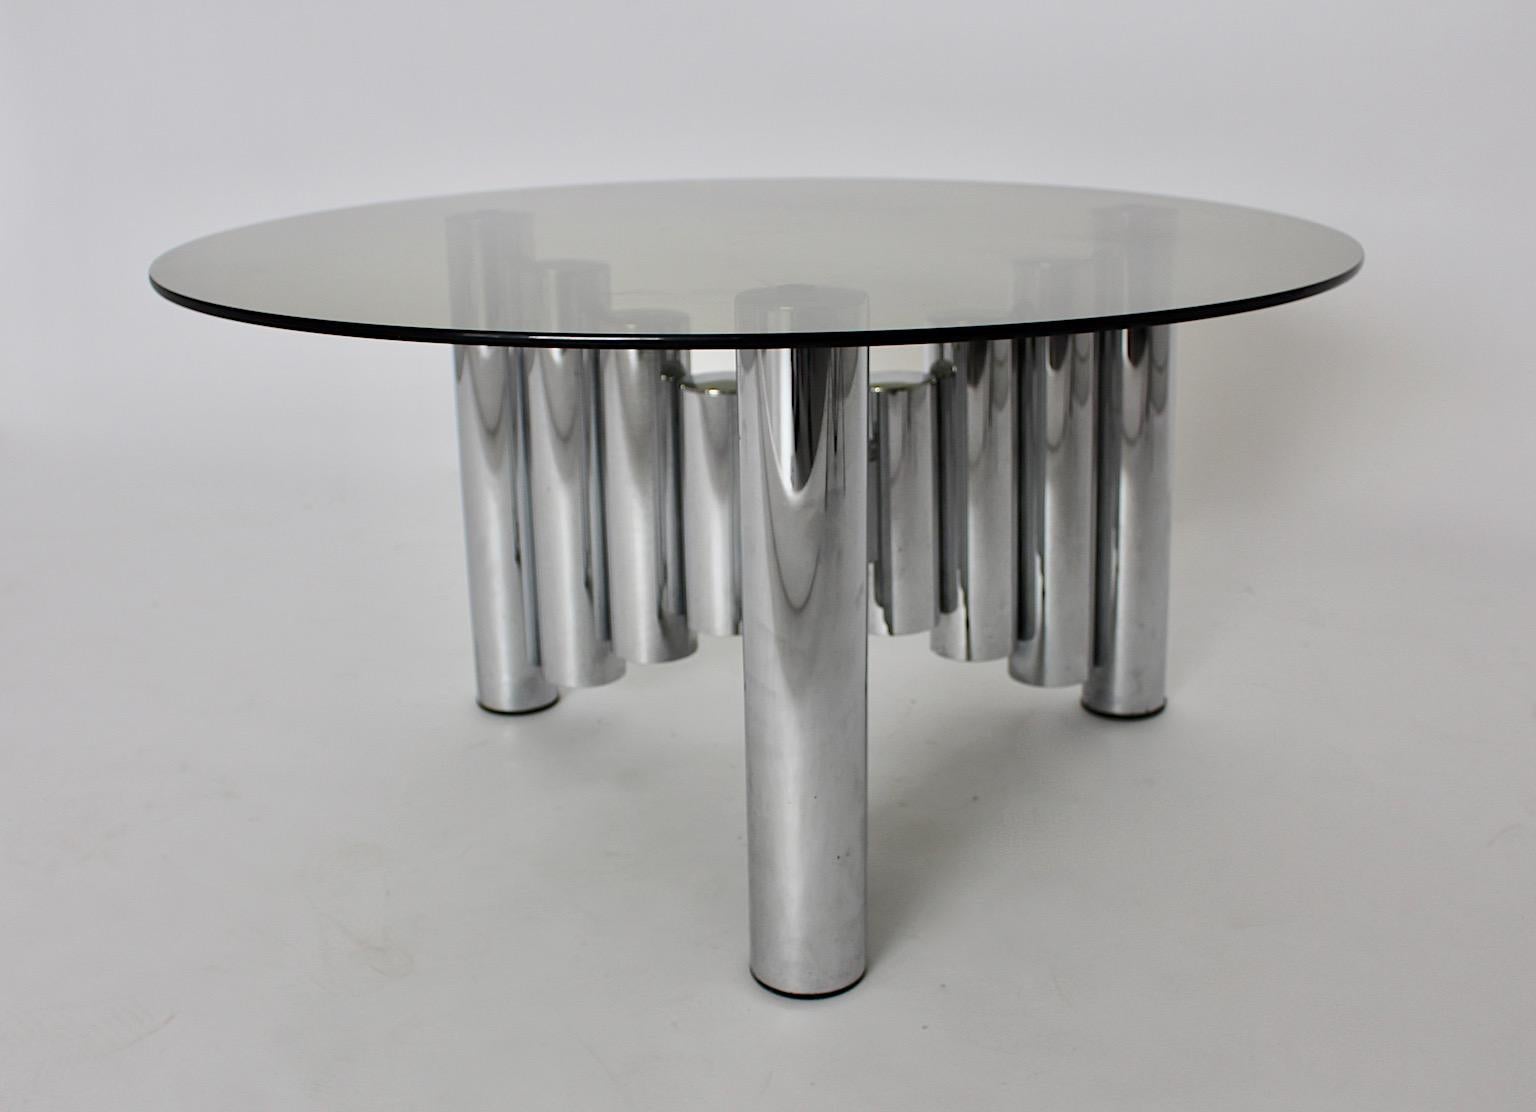 Sculptural Modernist Vintage Chromed Metal Glass Coffee Table Side Table 1960s In Good Condition For Sale In Vienna, AT